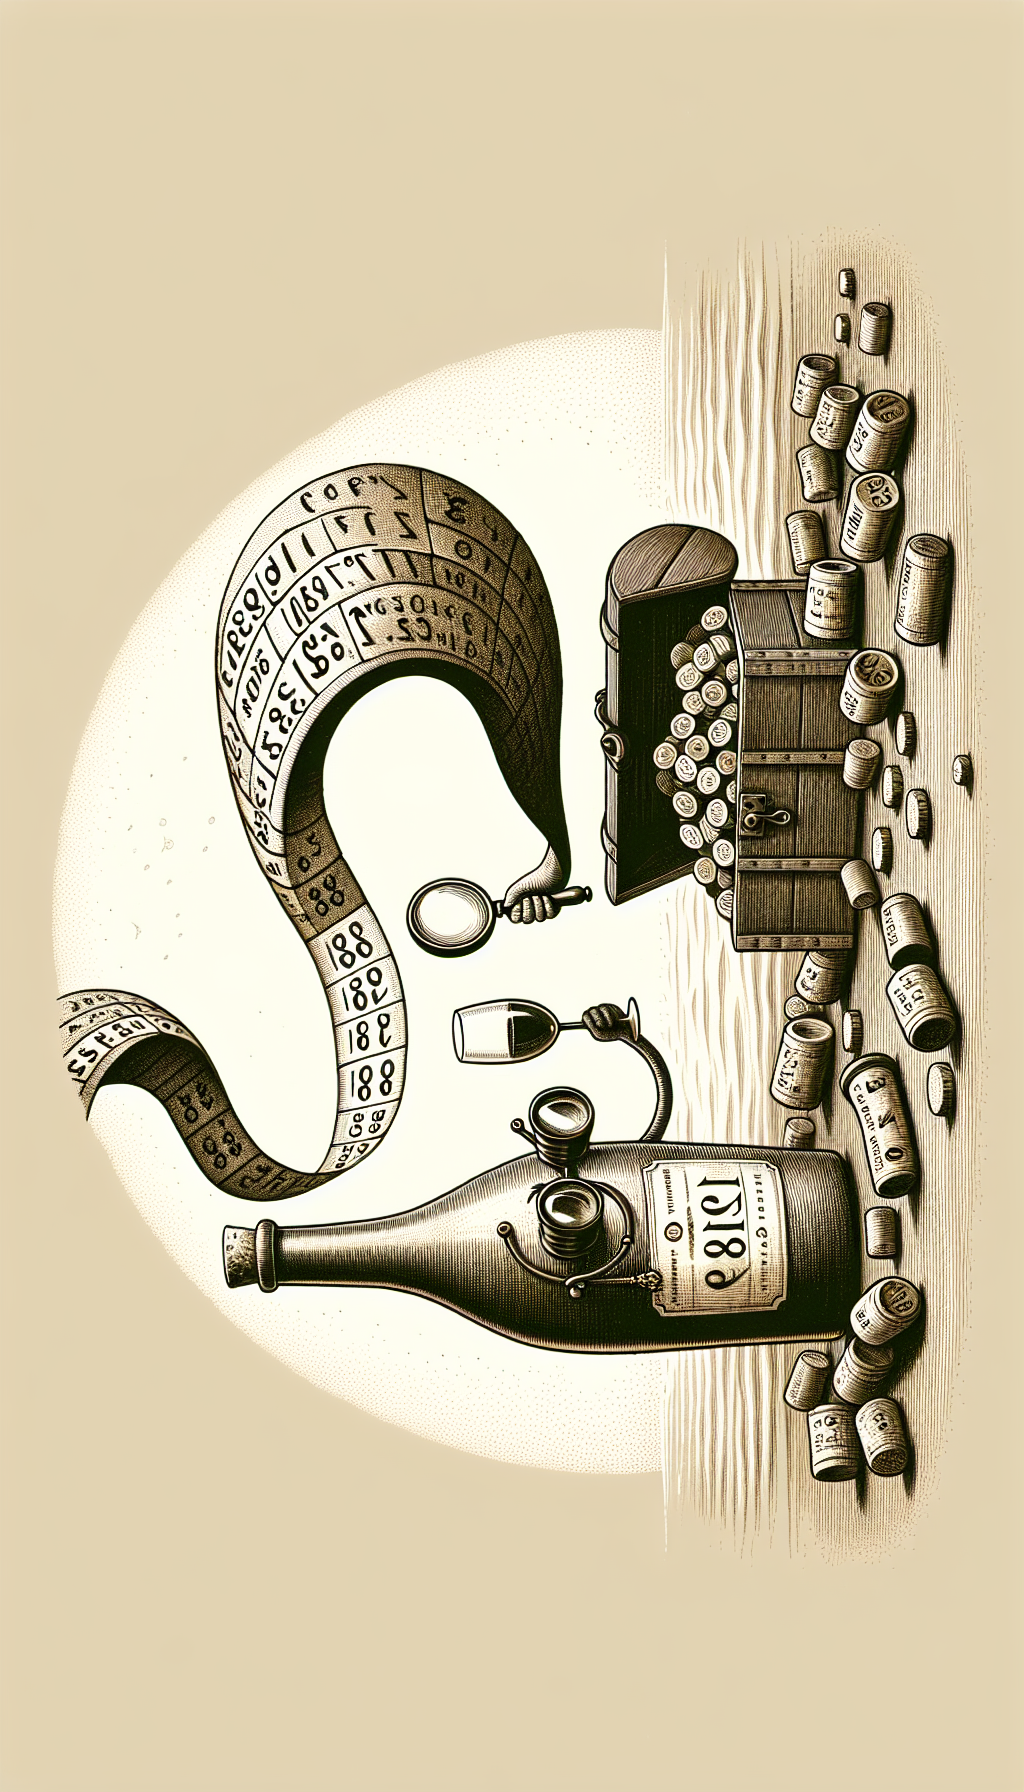 A whimsical, sepia-toned illustration featuring an anthropomorphic, monocle-clad bottle perched on a treasure chest overflowing with aged corks and vintage date labels, with a magnifying glass in hand. The bottle examines a swirling ribbon of dates transforming into coins, symbolizing the correlation between the age of bottles and their value, blending nostalgic etching with modern flair.